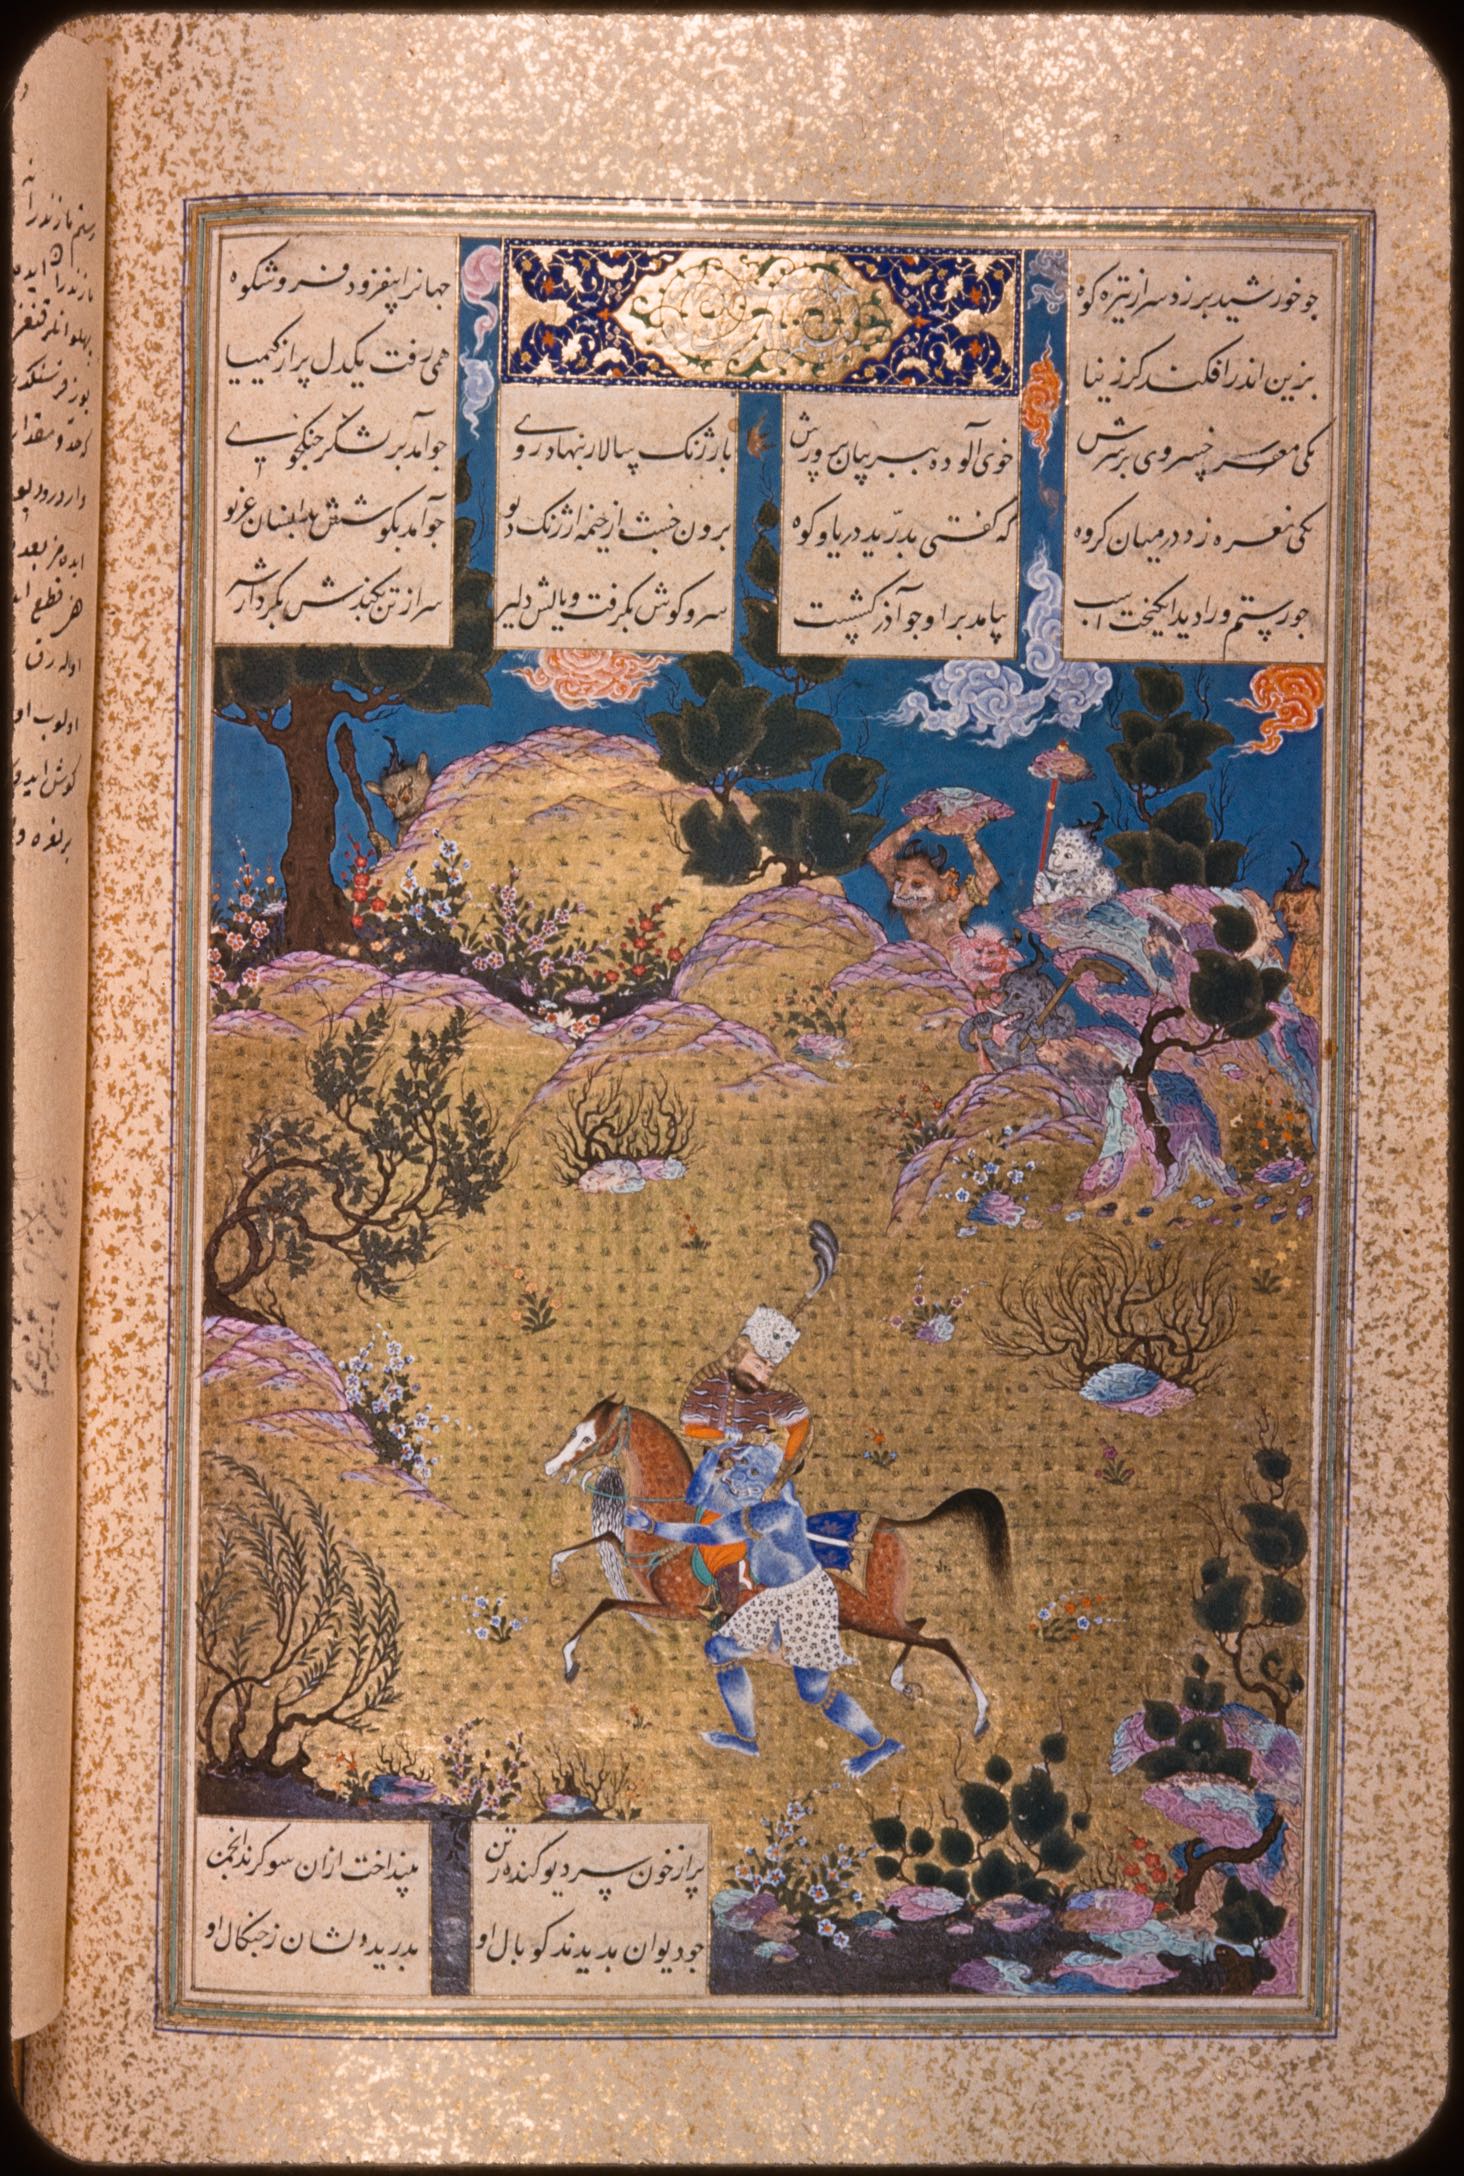 Rustam's Sixth Course: He Slays Arzhang (Tehran Museum of Contemporary Art), f. 122v from the Houghton Shahnama, shown in situ